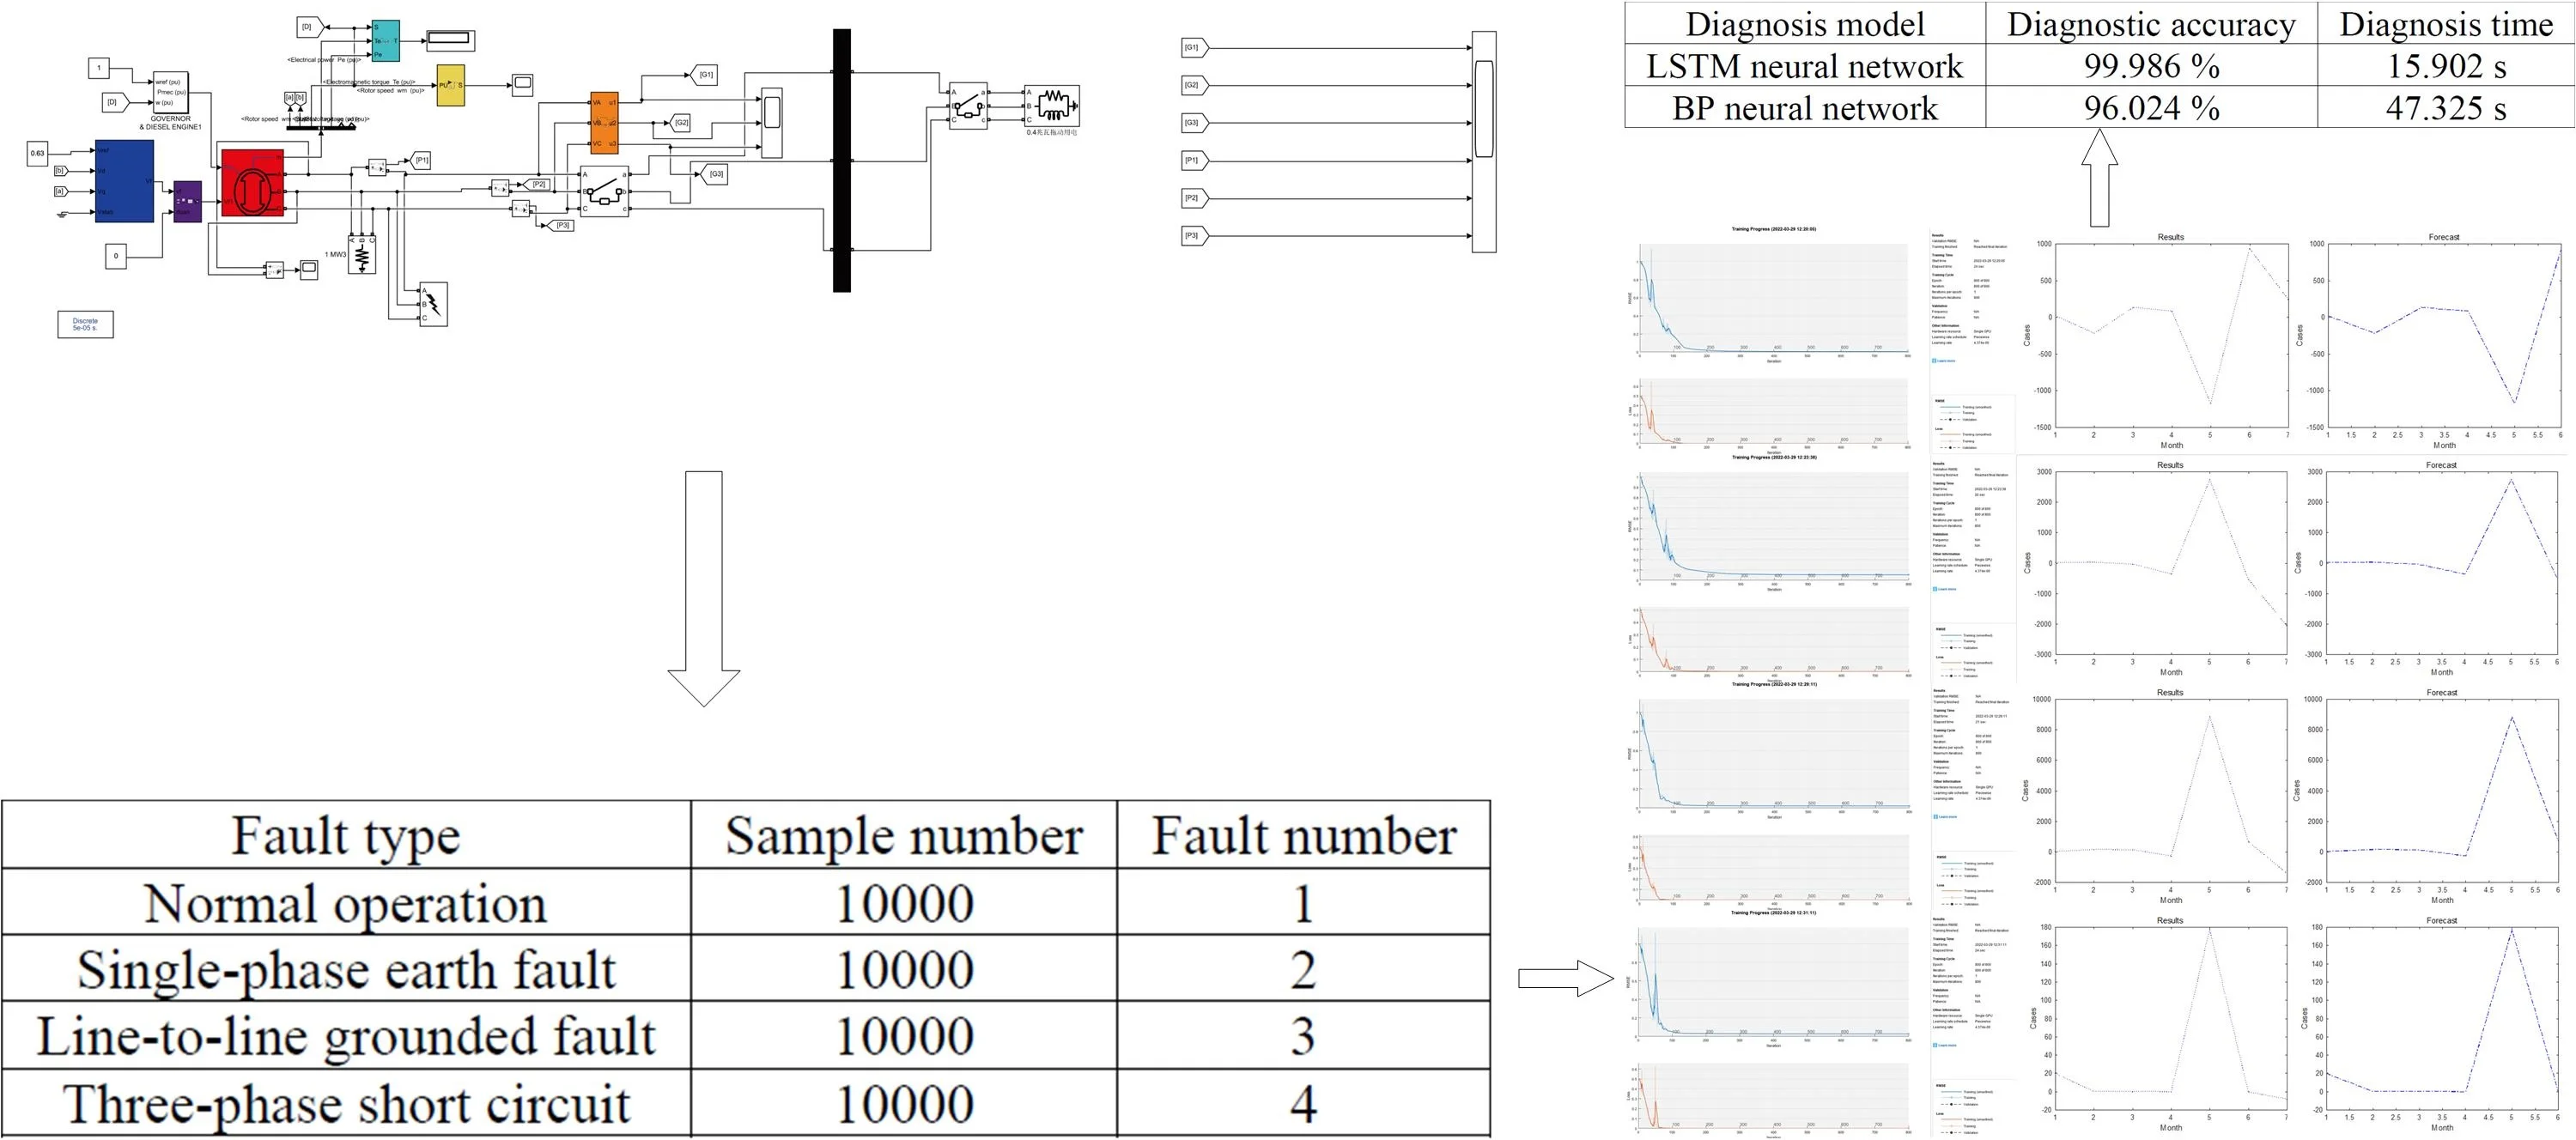 Fault diagnosis of ship power station based on LSTM neural network algorithm